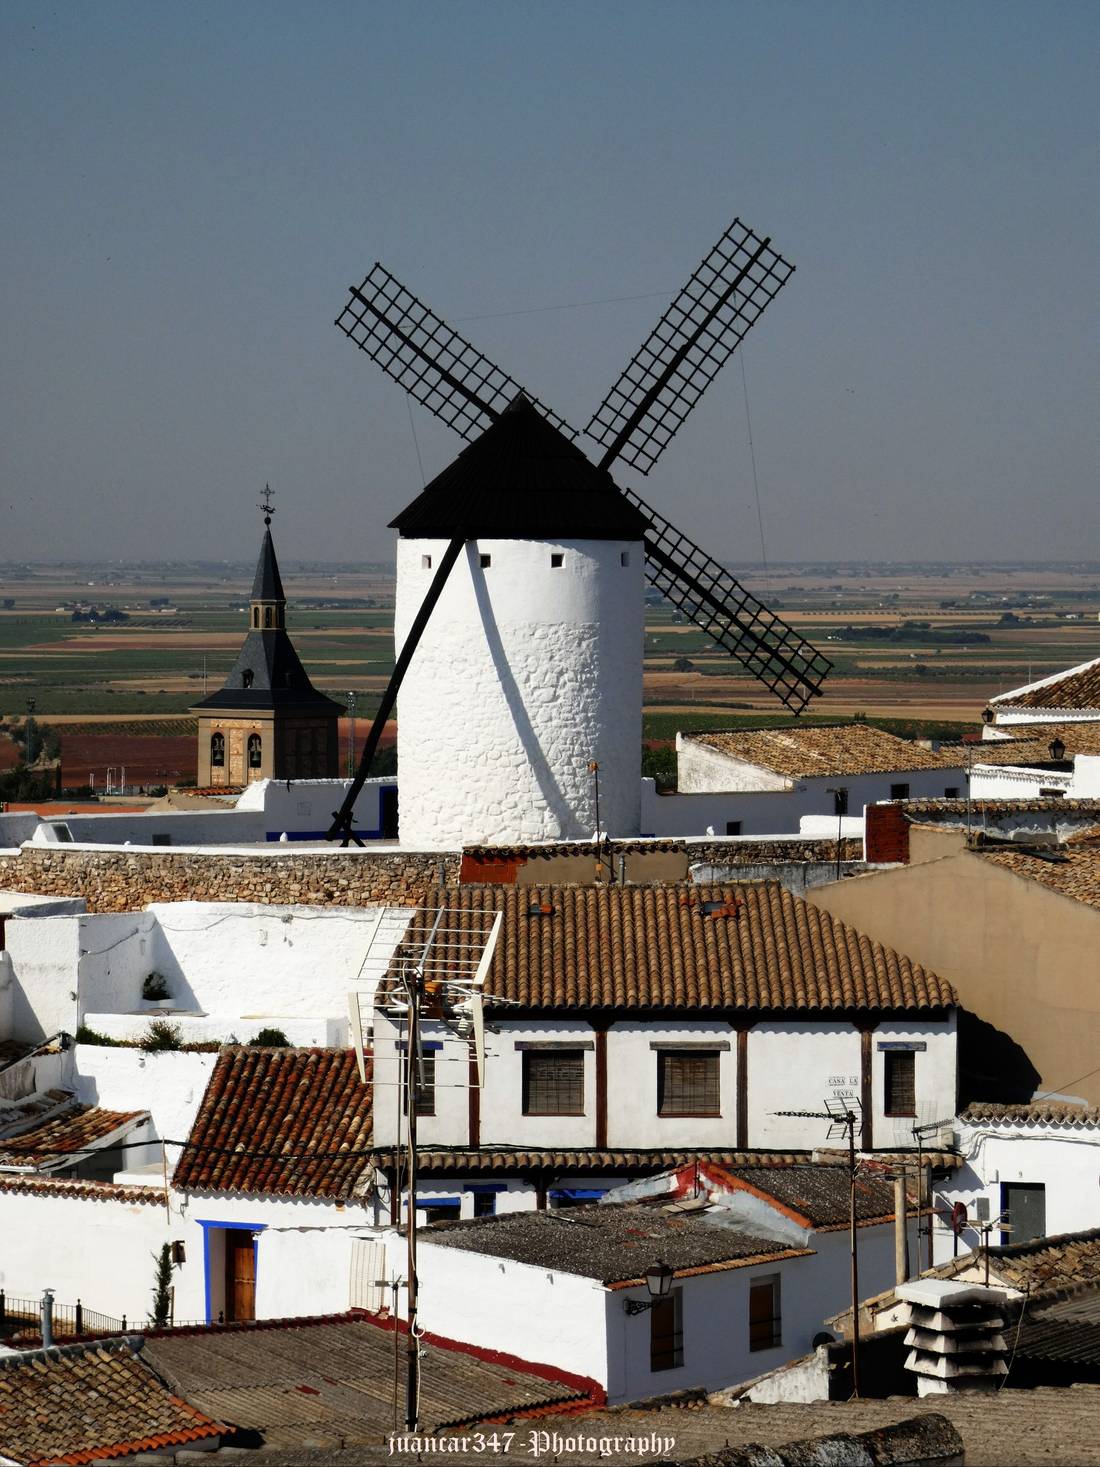 The mill is like a lighthouse protruding from the oldest neighborhood of Campo de Criptana